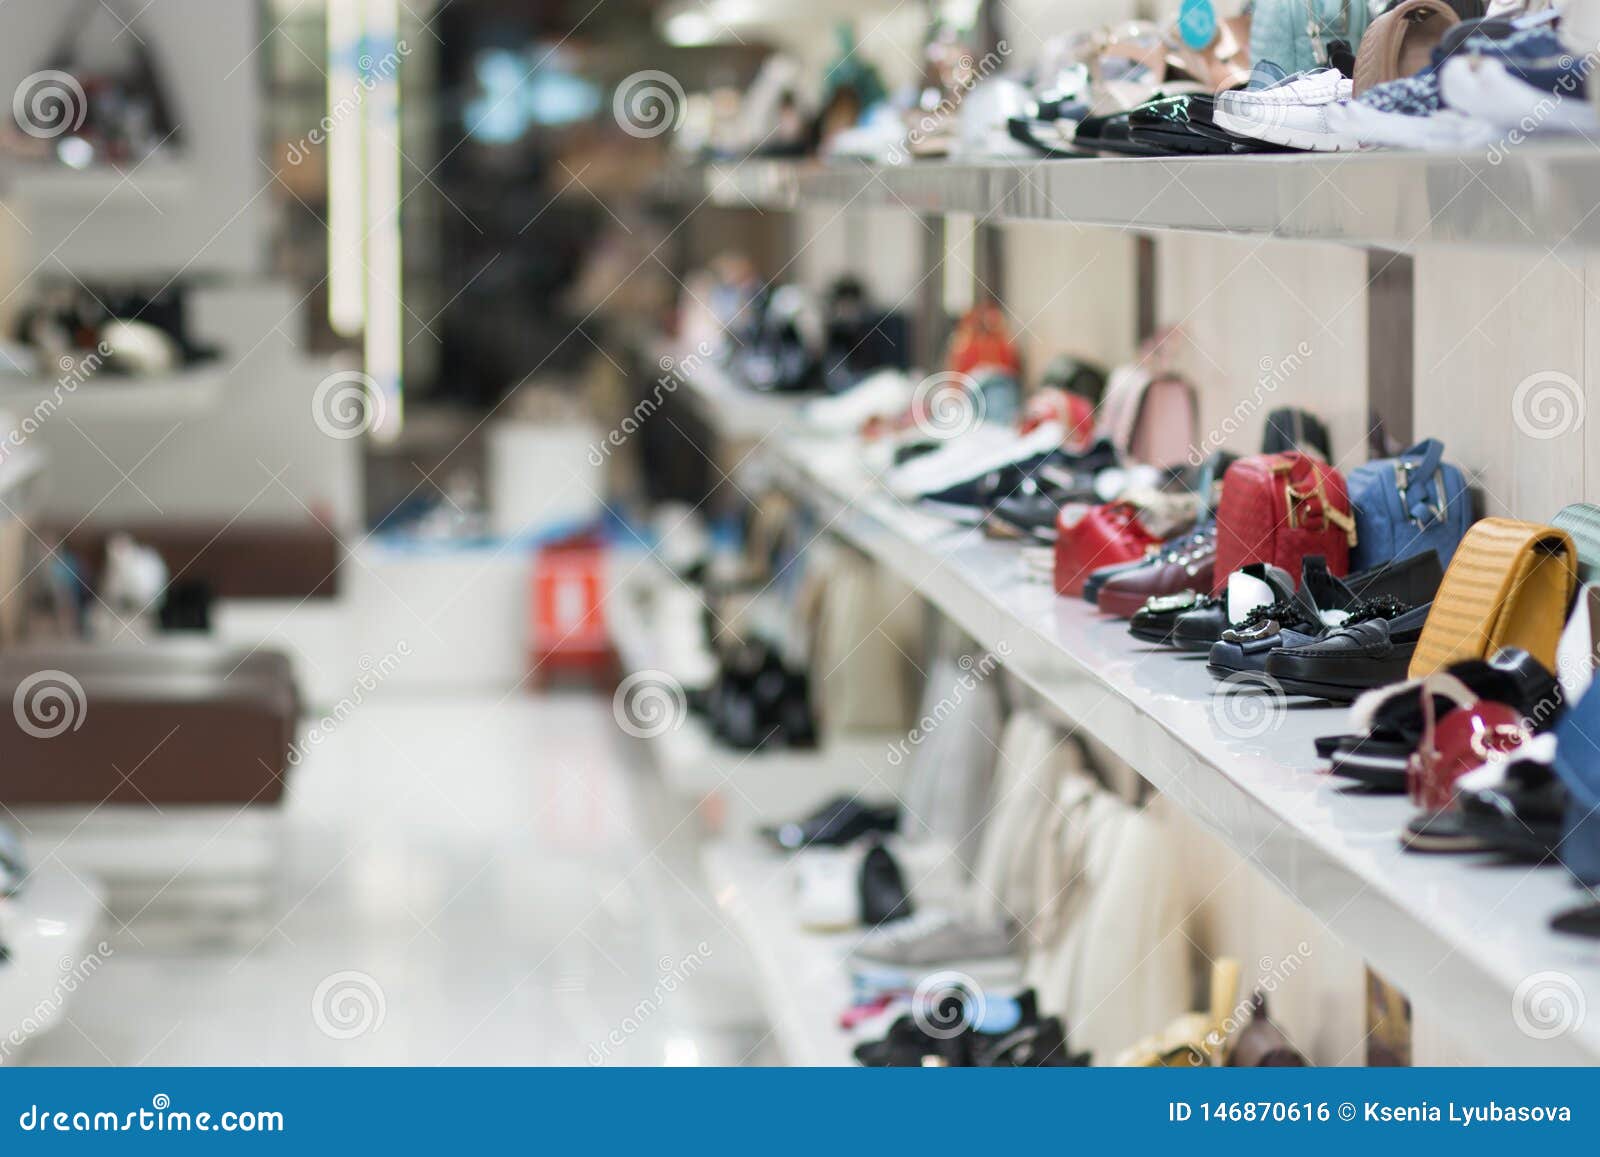 White Store Shelves With Shoes And Bags Stock Photo Image Of